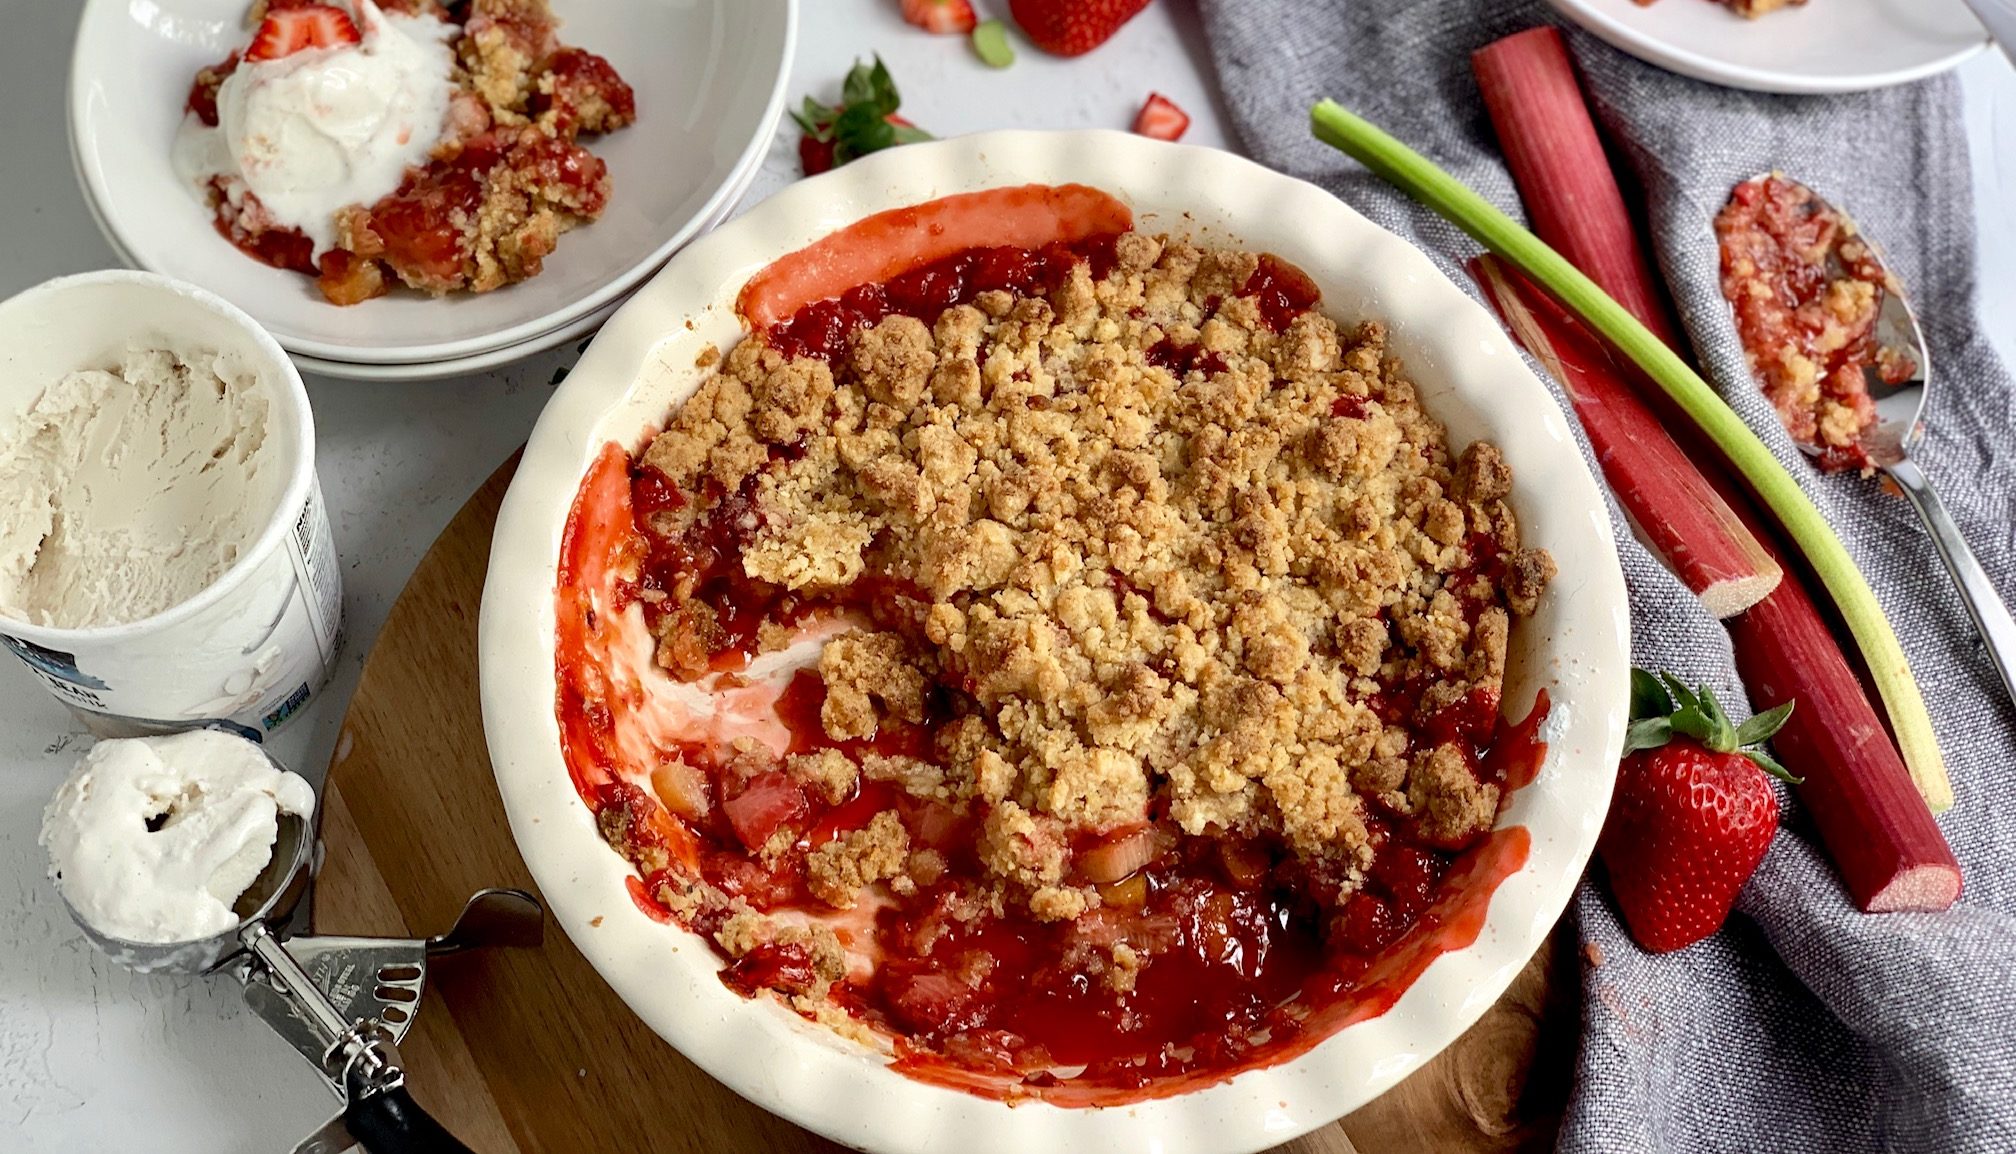 Strawberry Rhubarb Crumble - Eating Gluten and Dairy Free